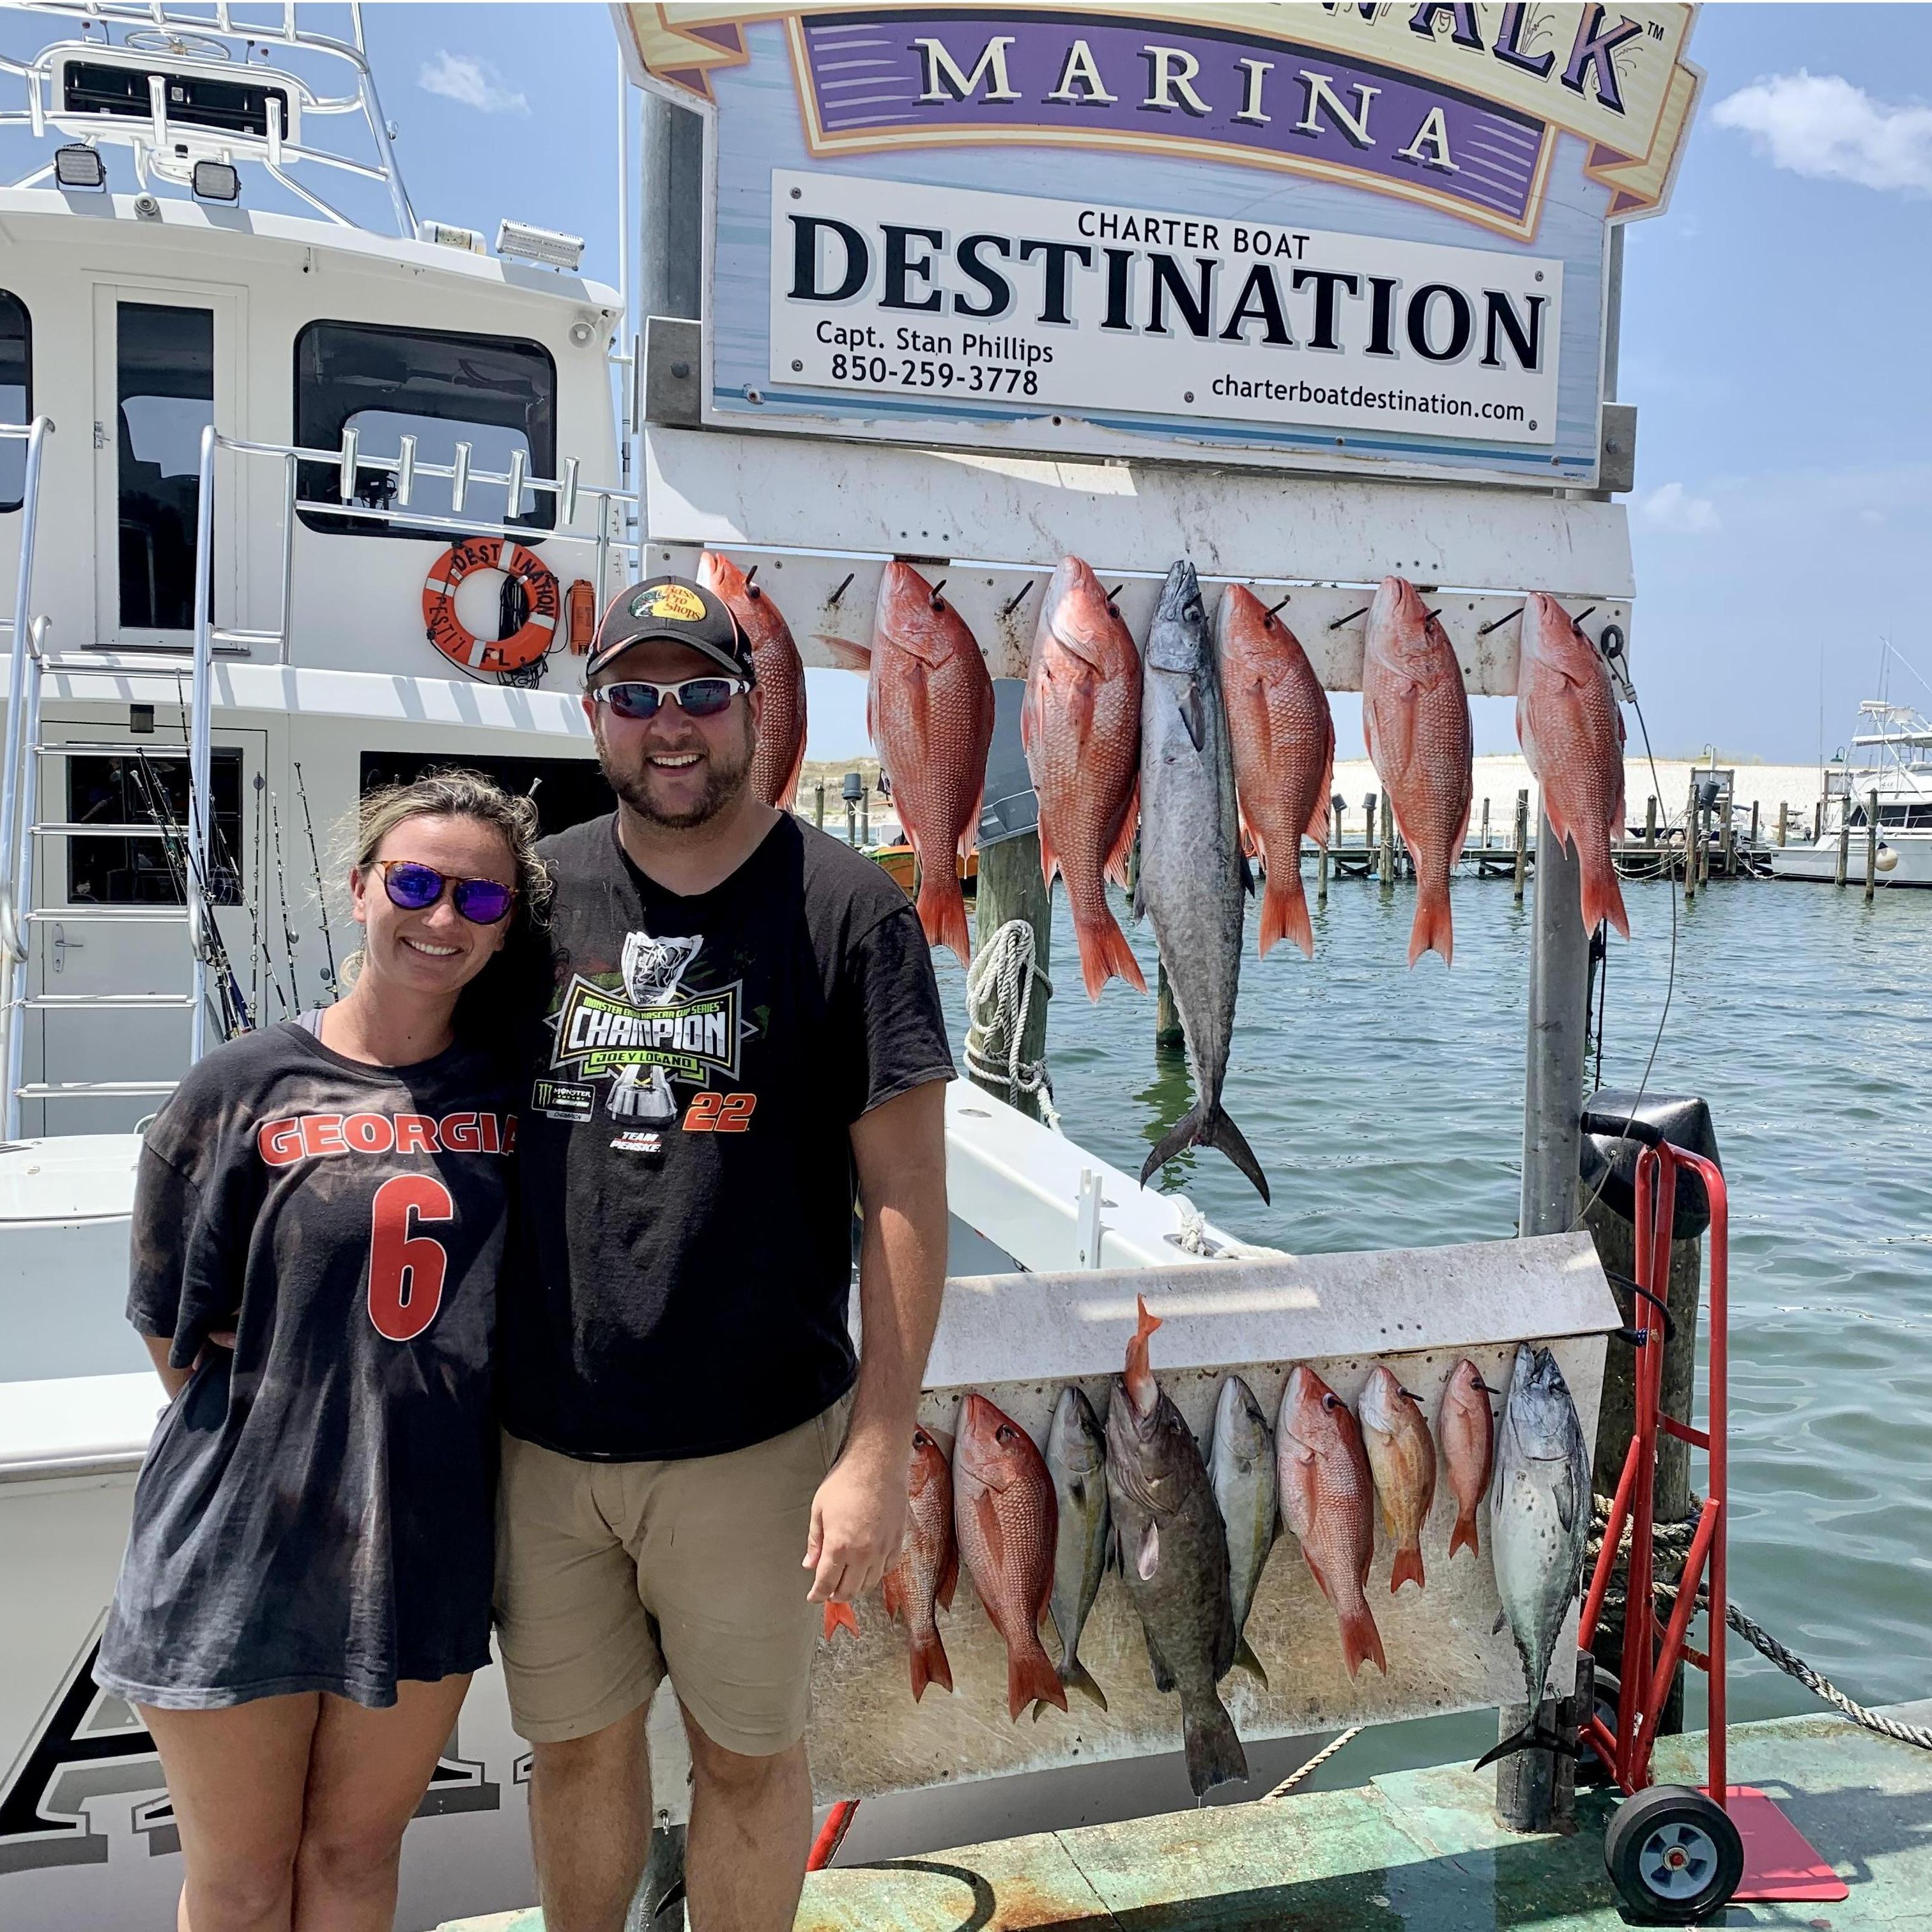 For 4th of July in 2019, we headed down to Destin to visit his Mom. His dad also spent the week in Destin & we spent one day going deep-sea fishing & ended up catching a bunch of fish.